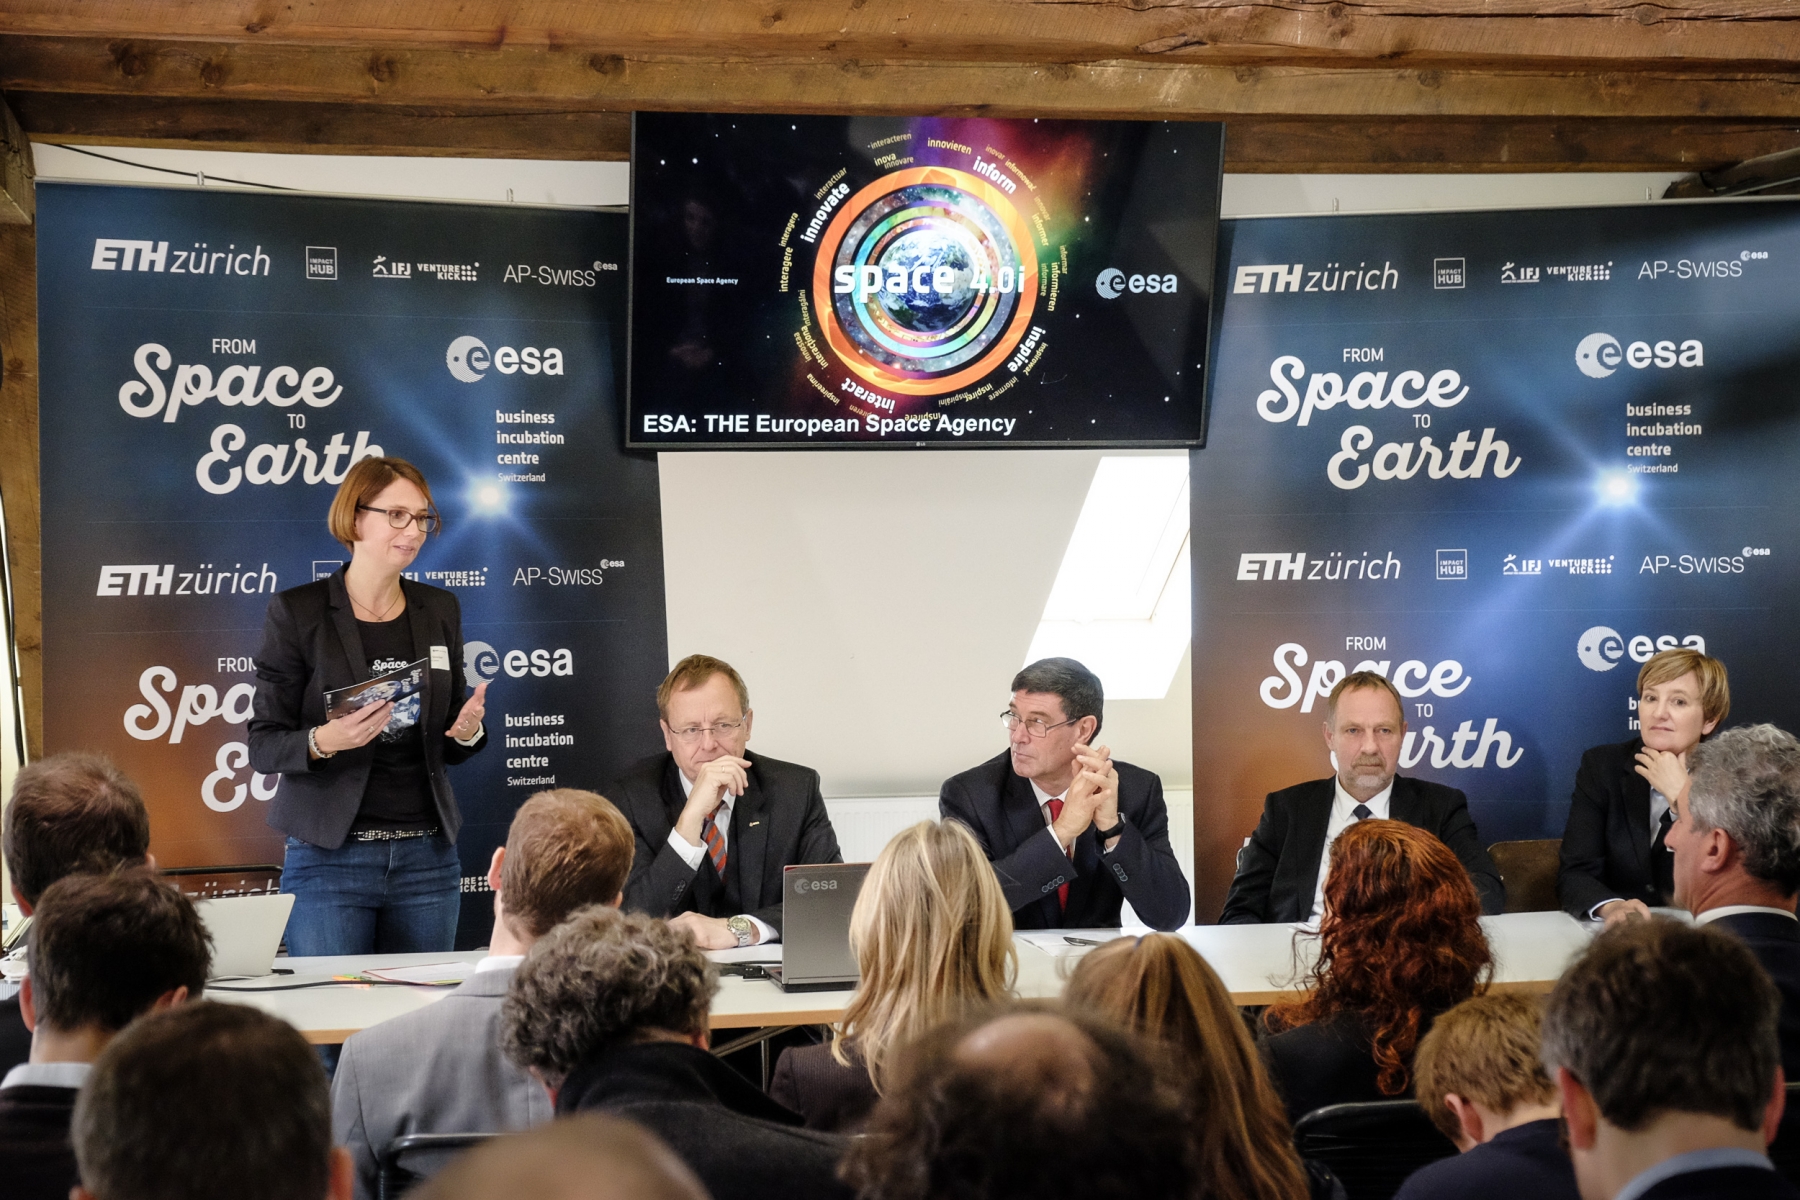 The Swiss launch event. From left to right: Nanja Strecker (project manager BIC), Jan Wörner (ESA DG), Mauro Dell’ Ambrogio (State Secretary for Education, Research, Innovation, SERI), Detlef Günther (Vice President ETH), and an ETH representative